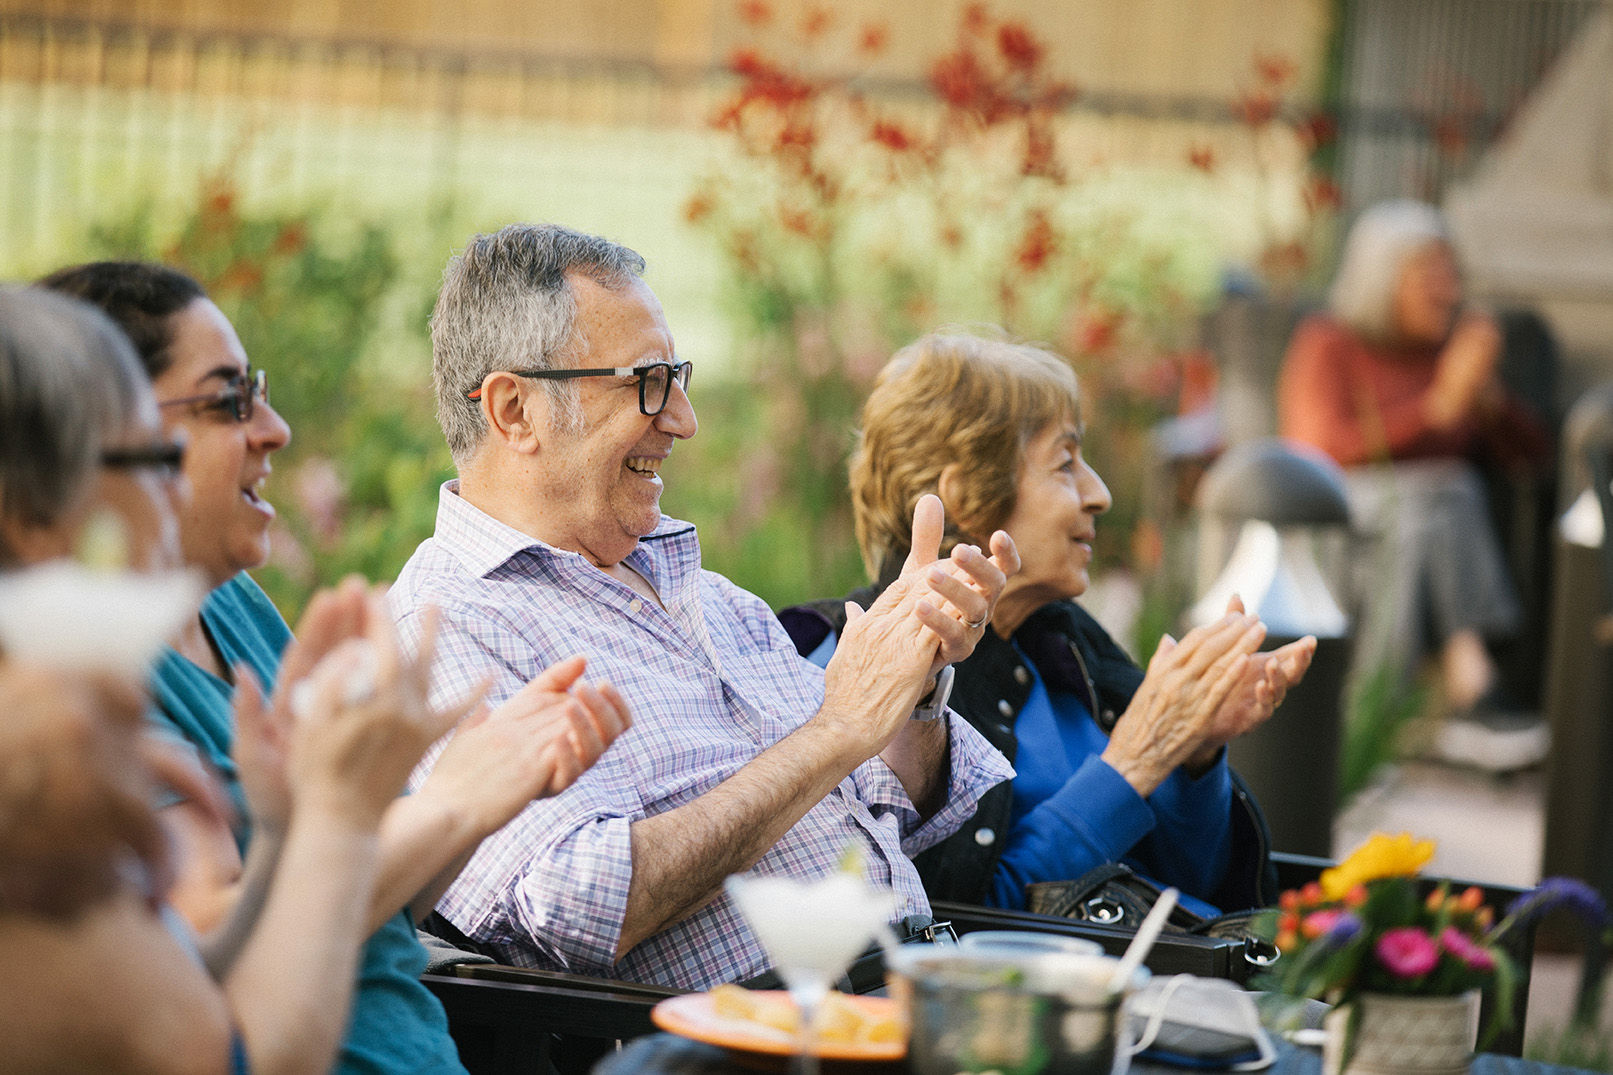 Senior Living residents enjoying time together outside on the patio